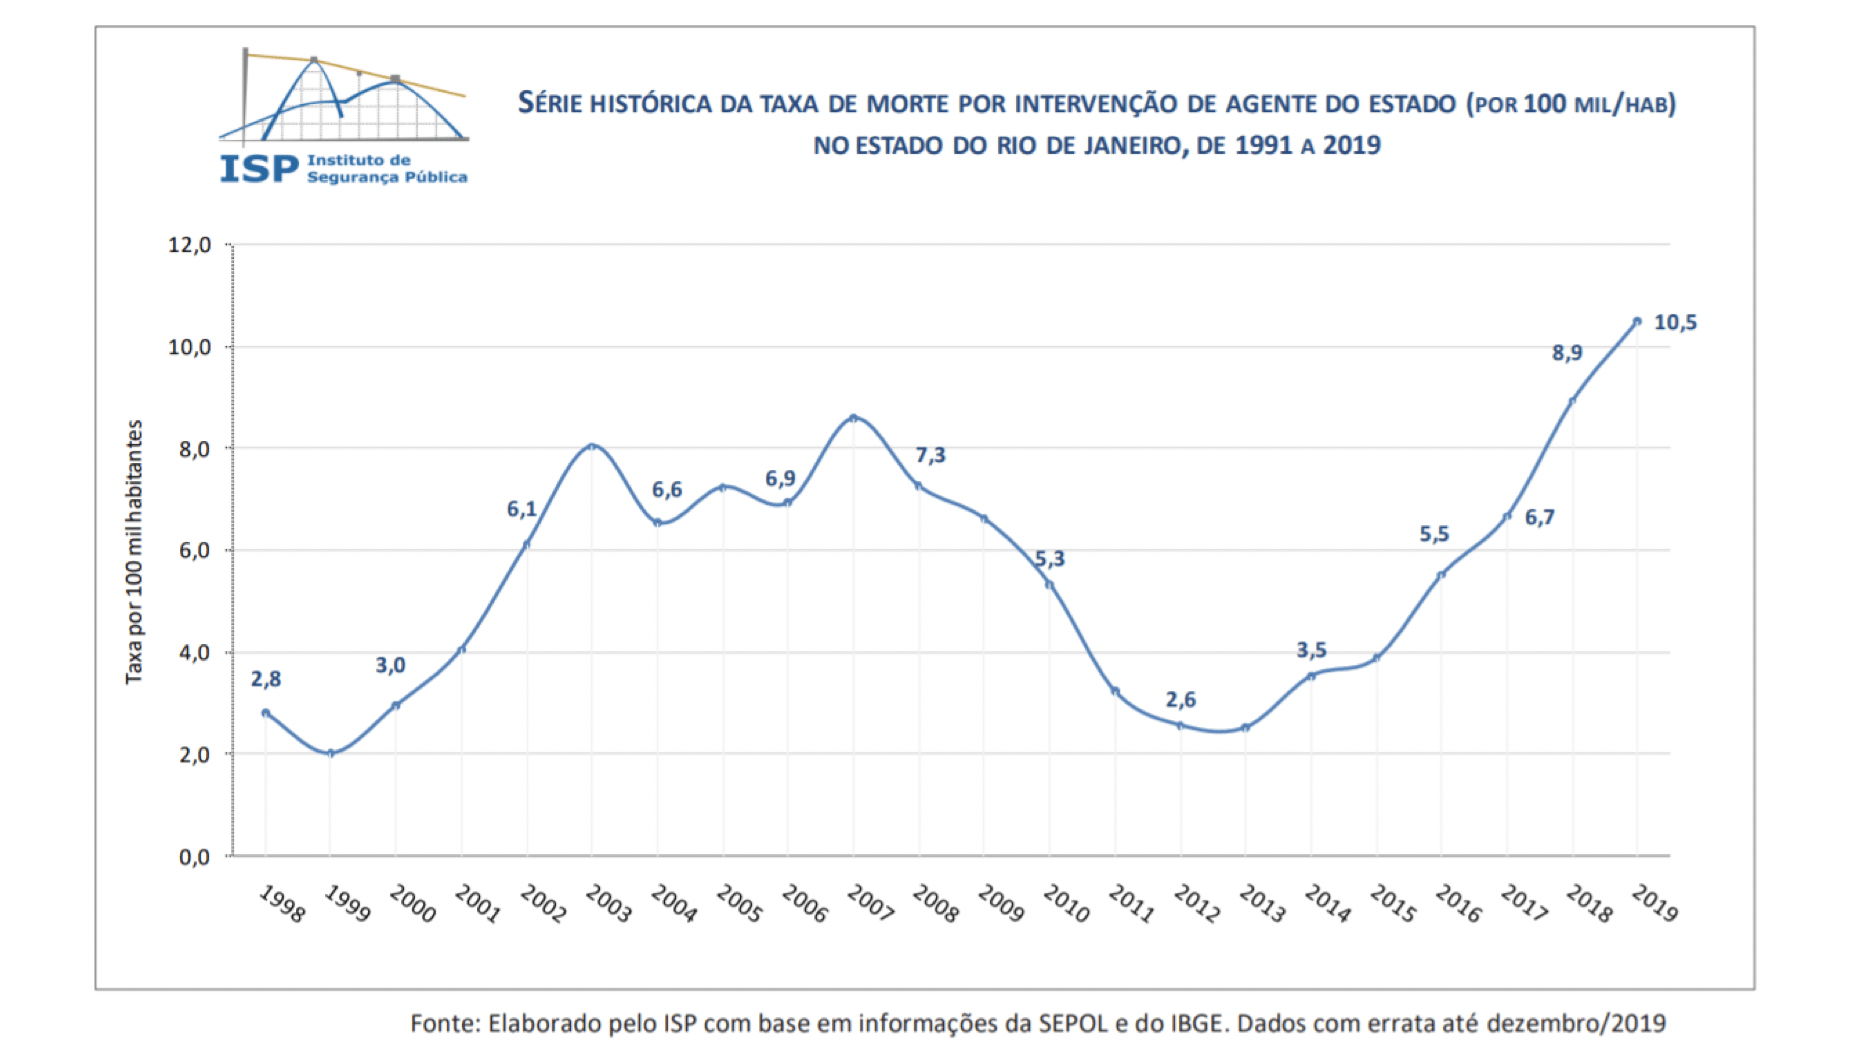 Source: Instituto de Segurança Pública. Text: Historical Series for the Death Rate from Intercession by State Agents (per 100 thousand/inhabitants) in the State of Rio de Janeiro, from 1991 to 2019